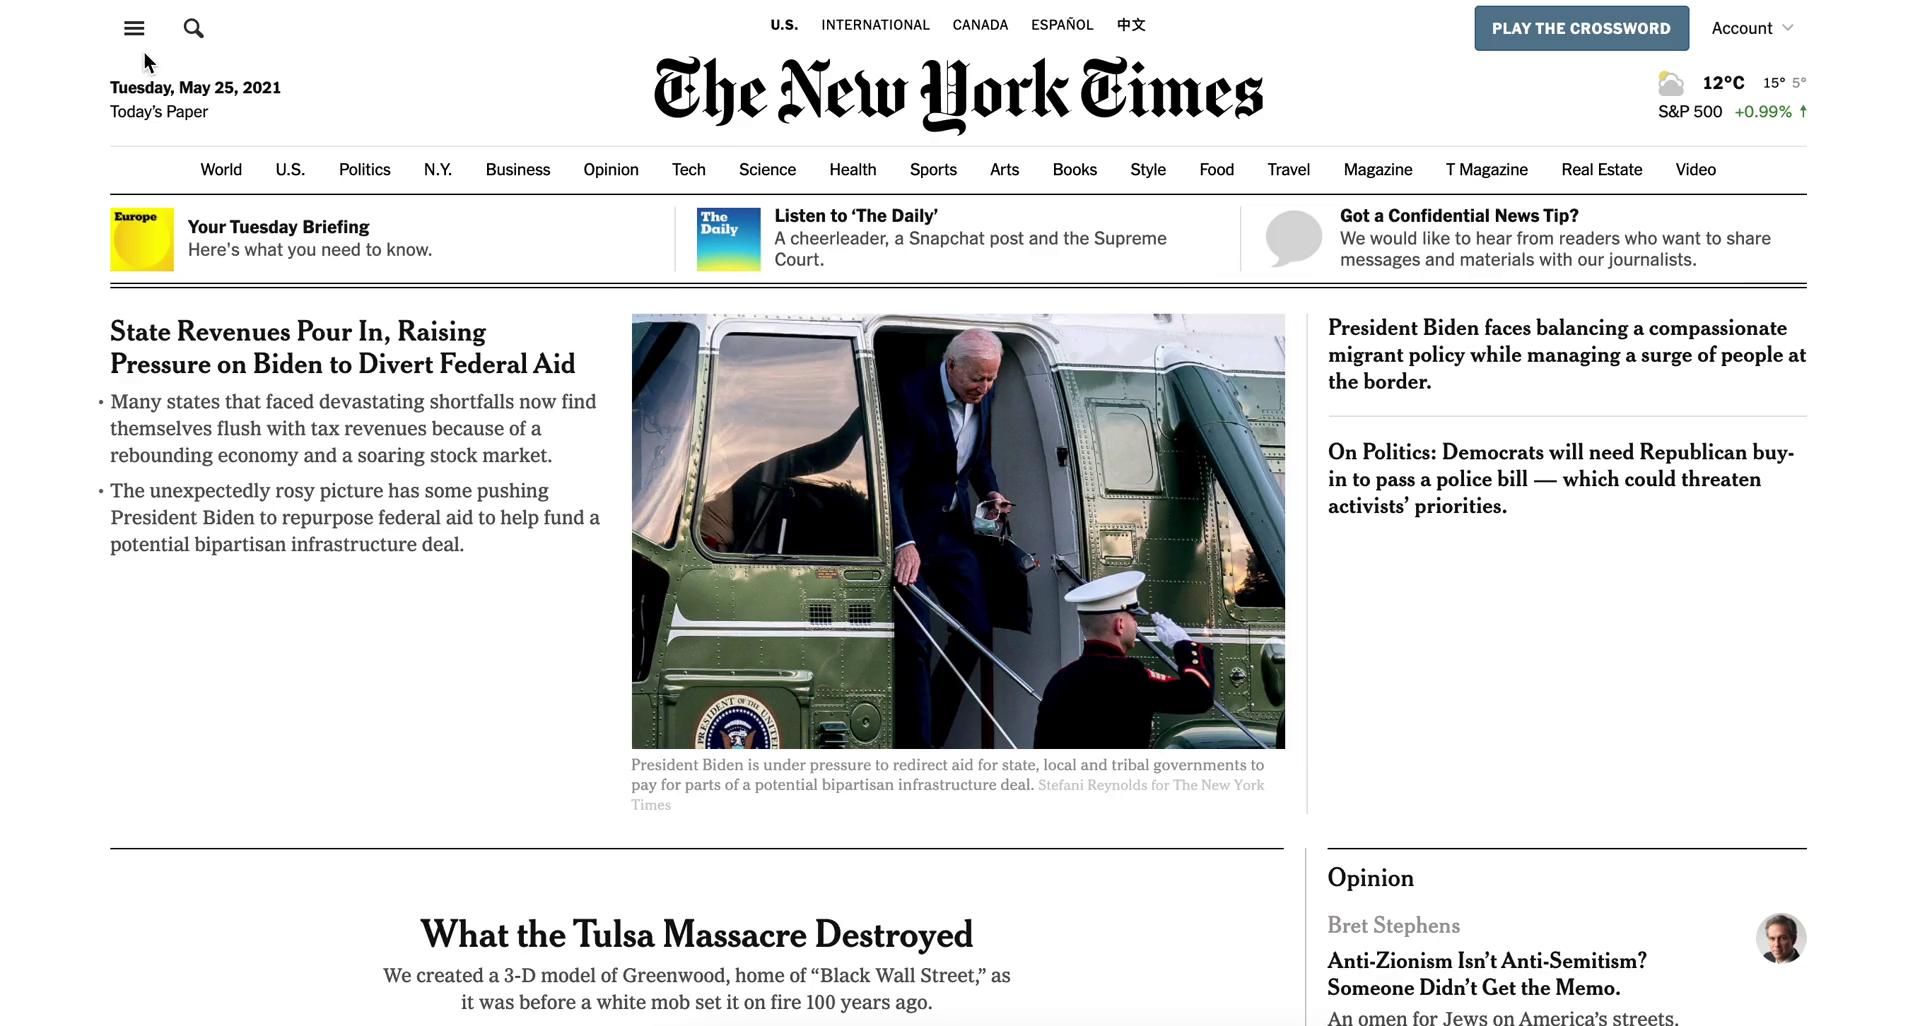 General browsing on The New York Times video screenshot